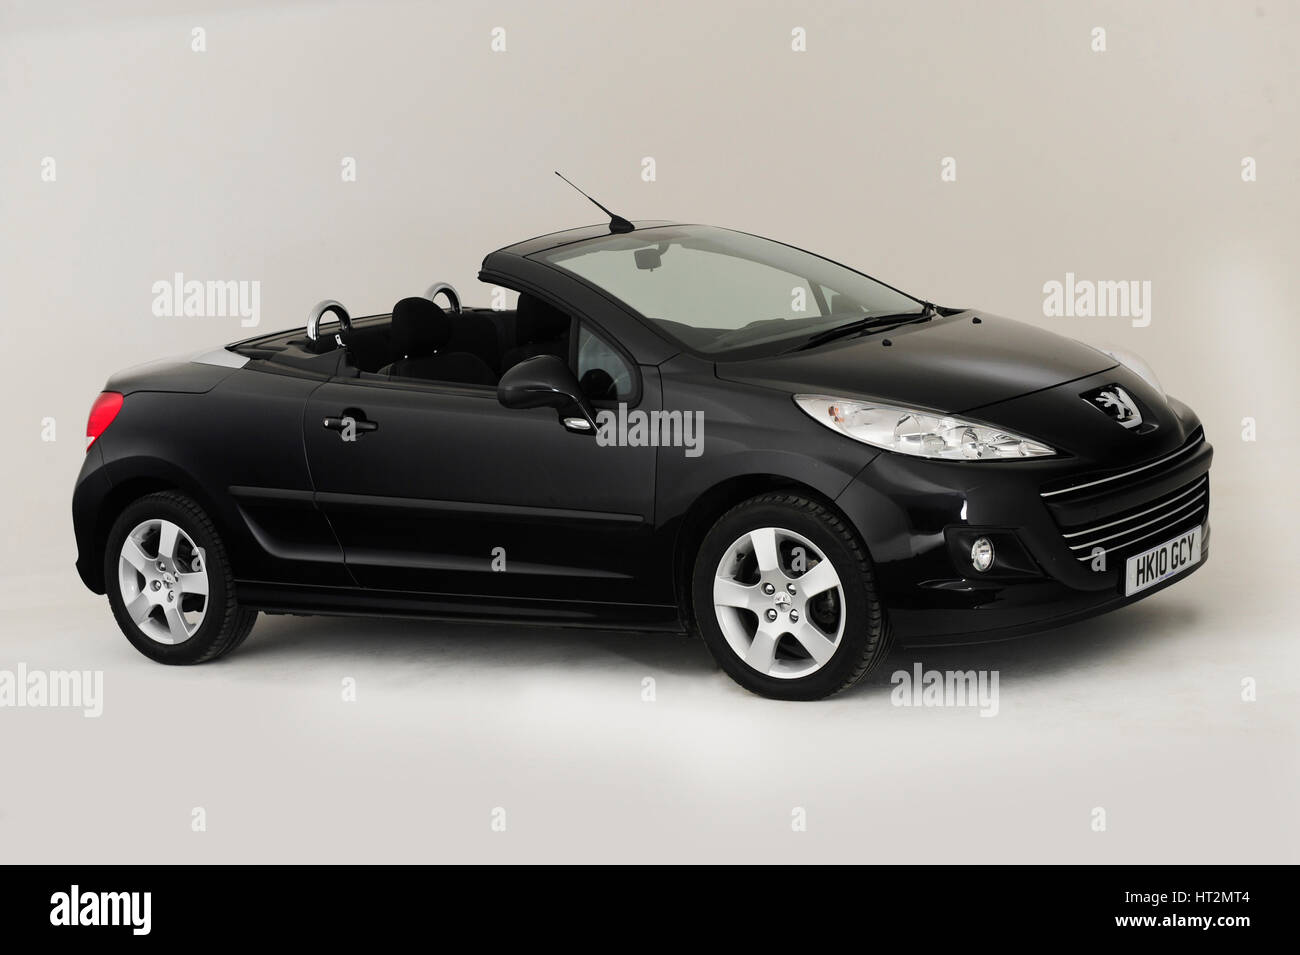 Interieur complet occasion Peugeot 207 phase 1 cabriolet